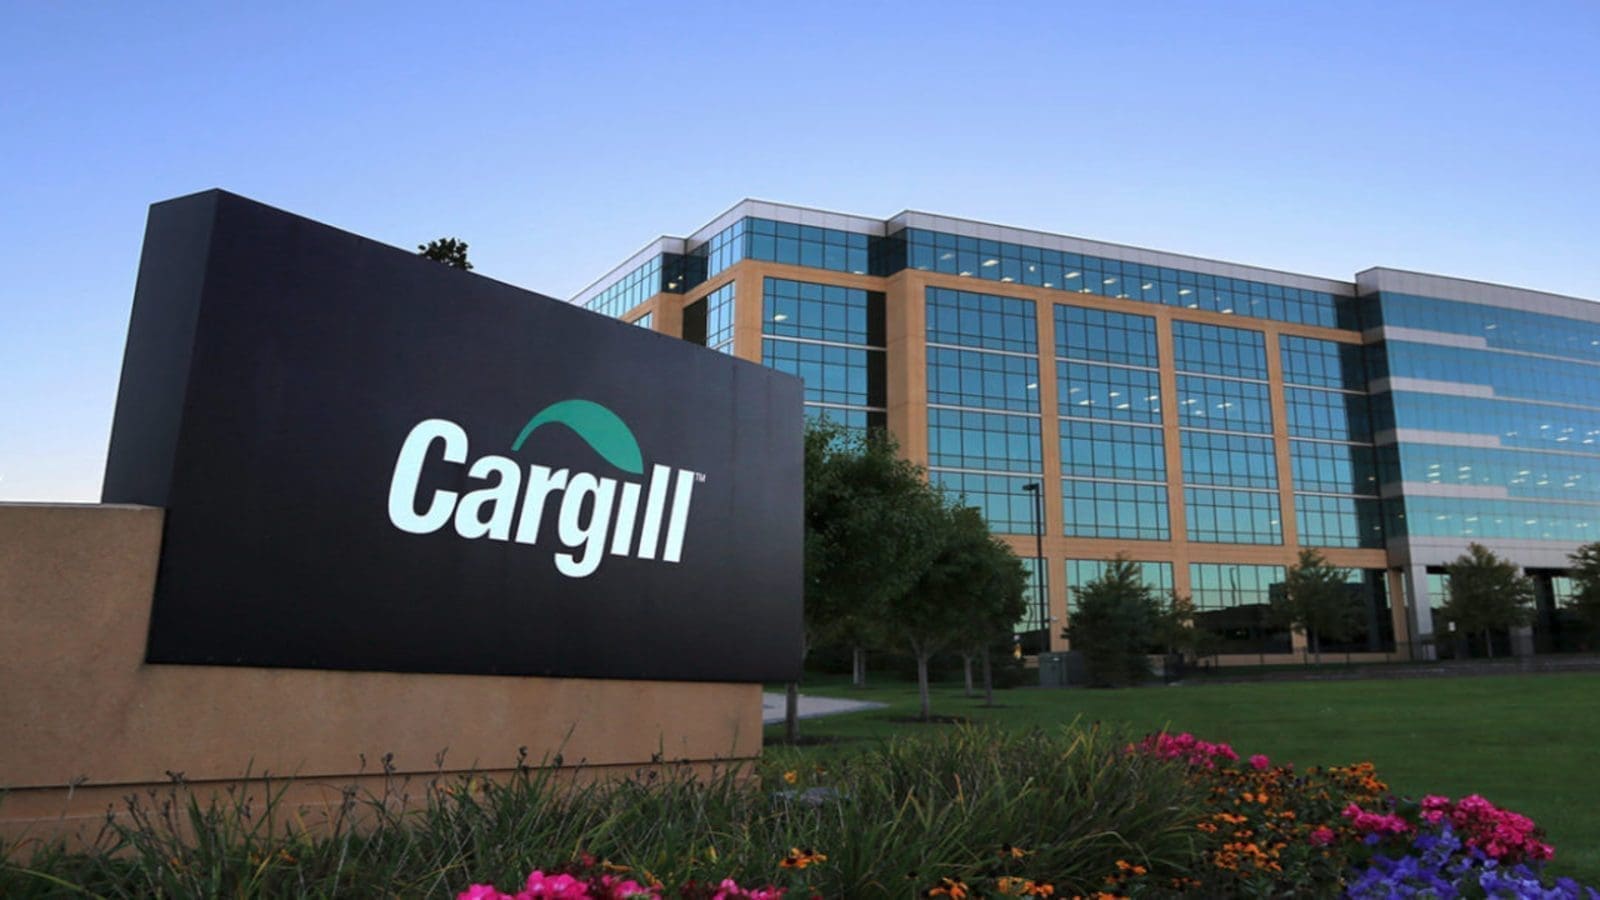 Cargill to build new soybean processing facility in Southeast Missouri to support growing domestic and global demand for oilseeds